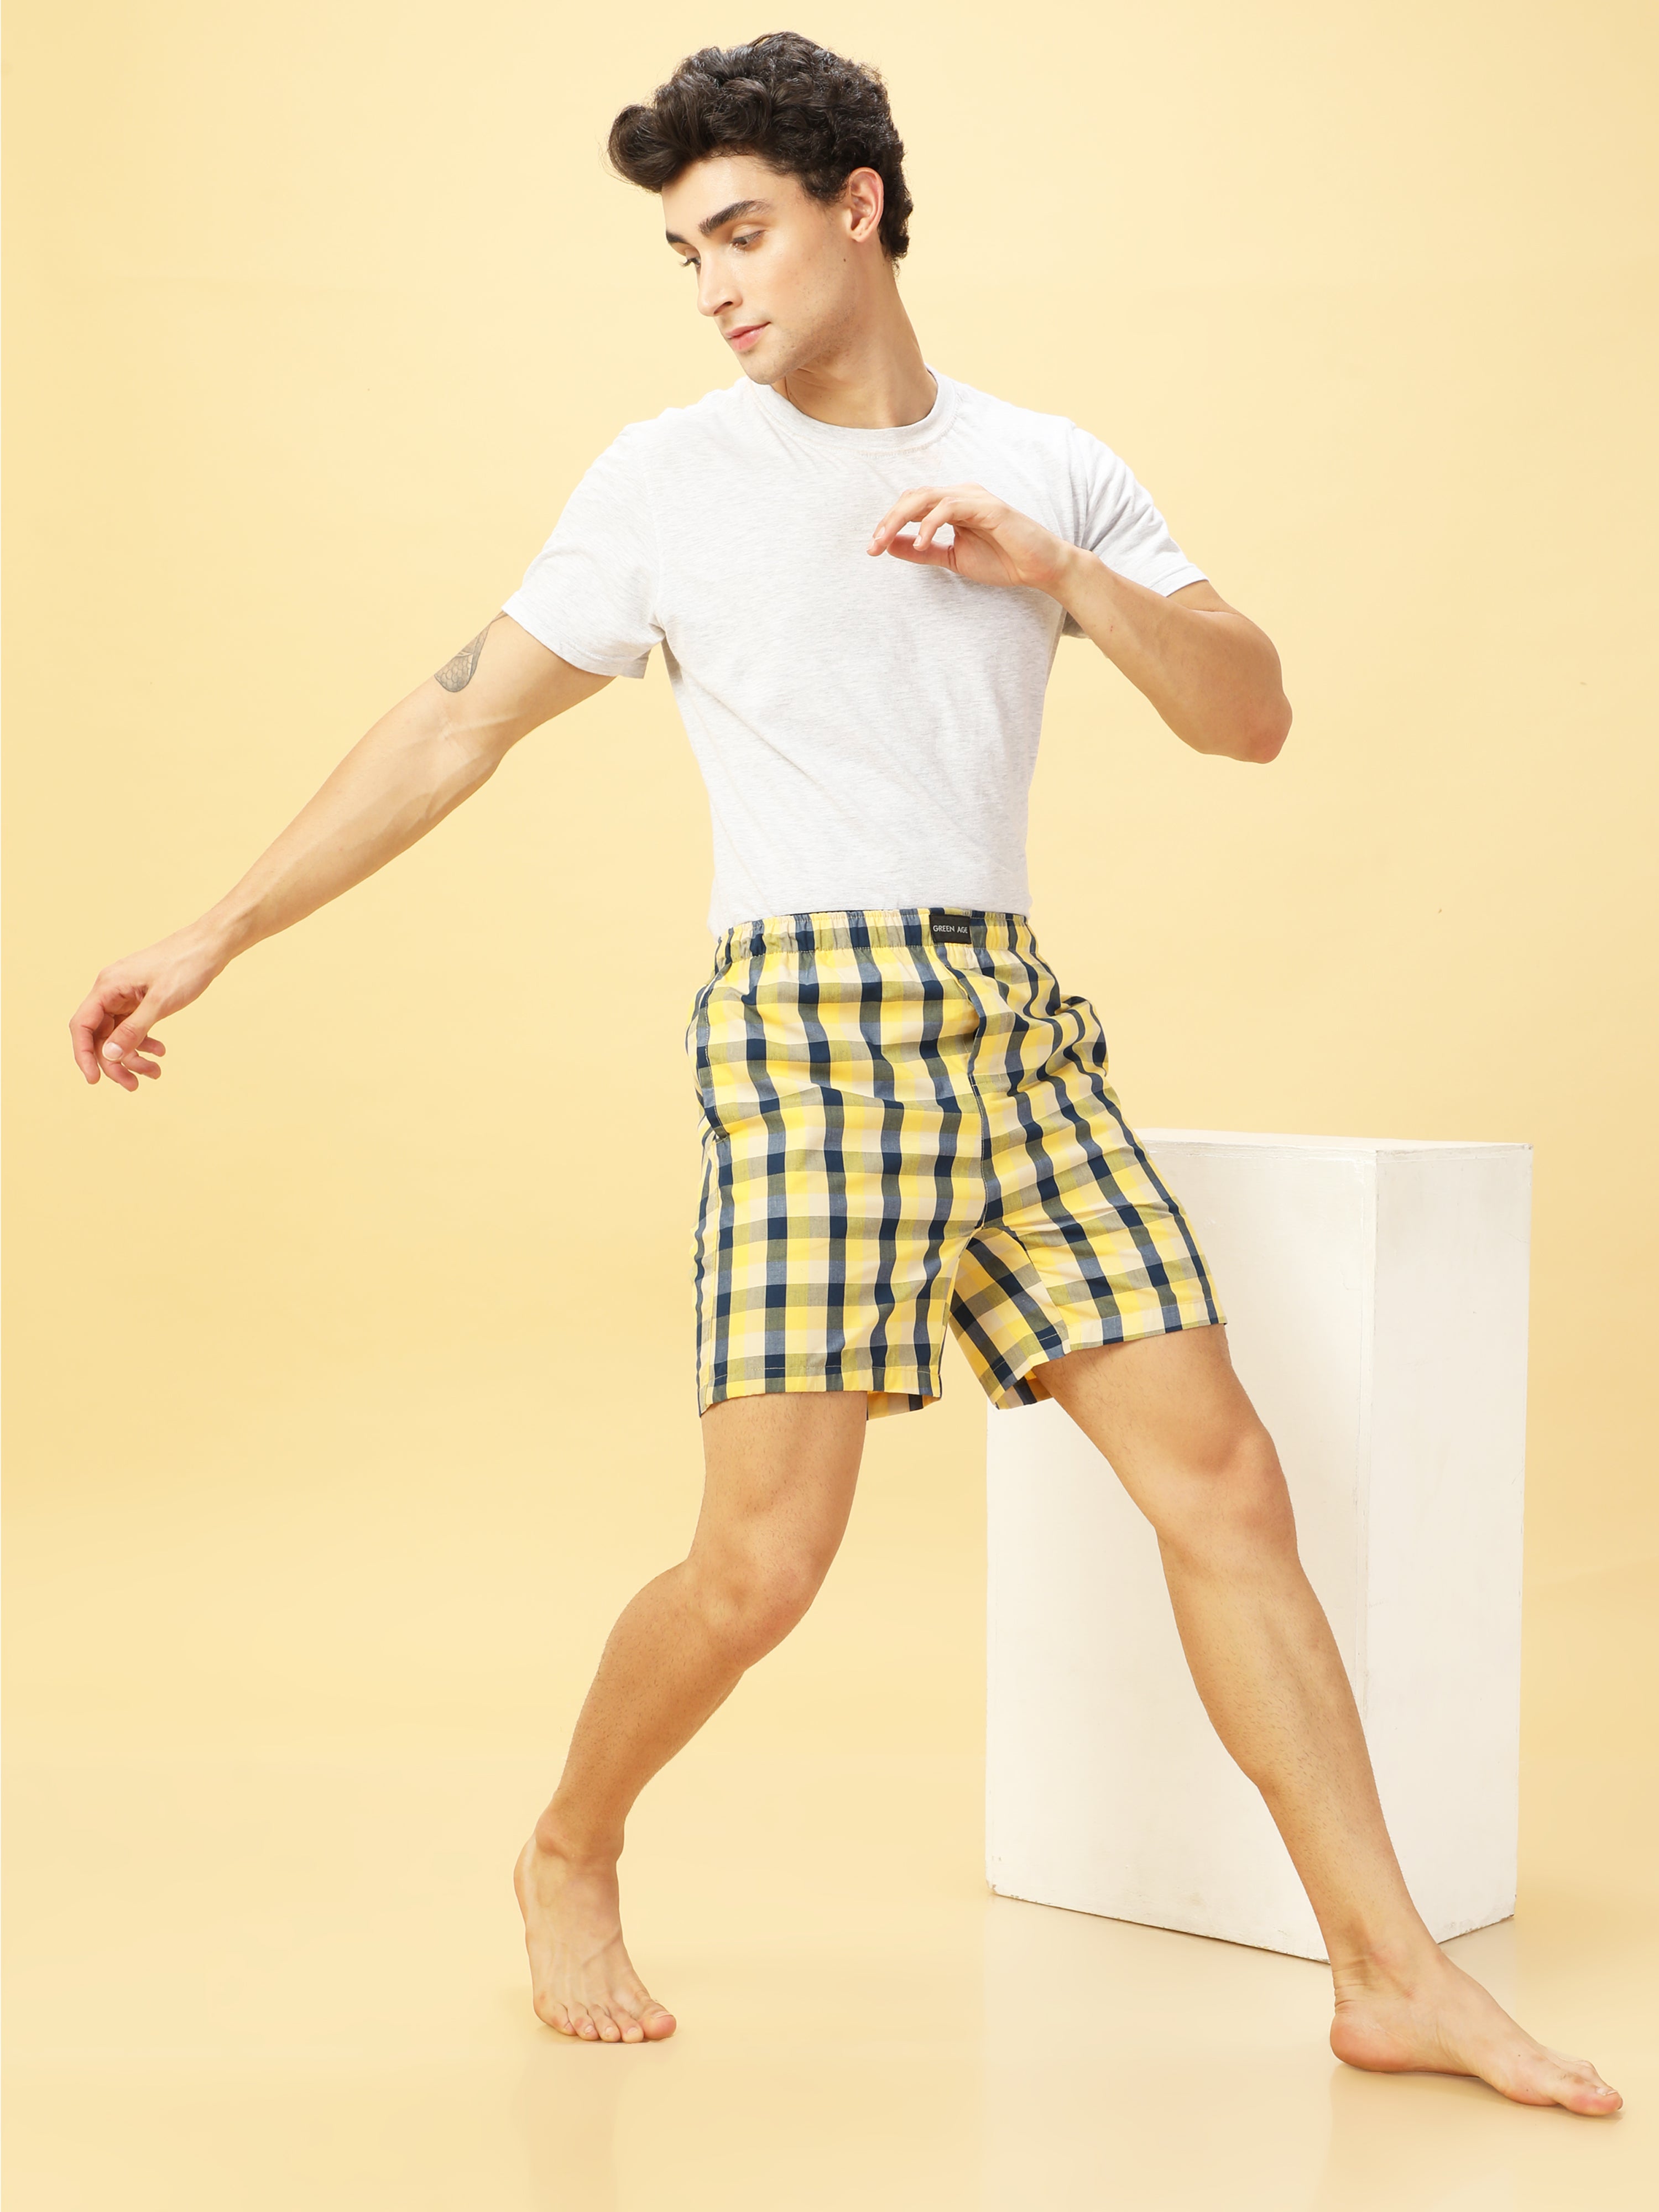 Pump! Recharge Boxer - S Navy, Yellow, White at  Men's Clothing store